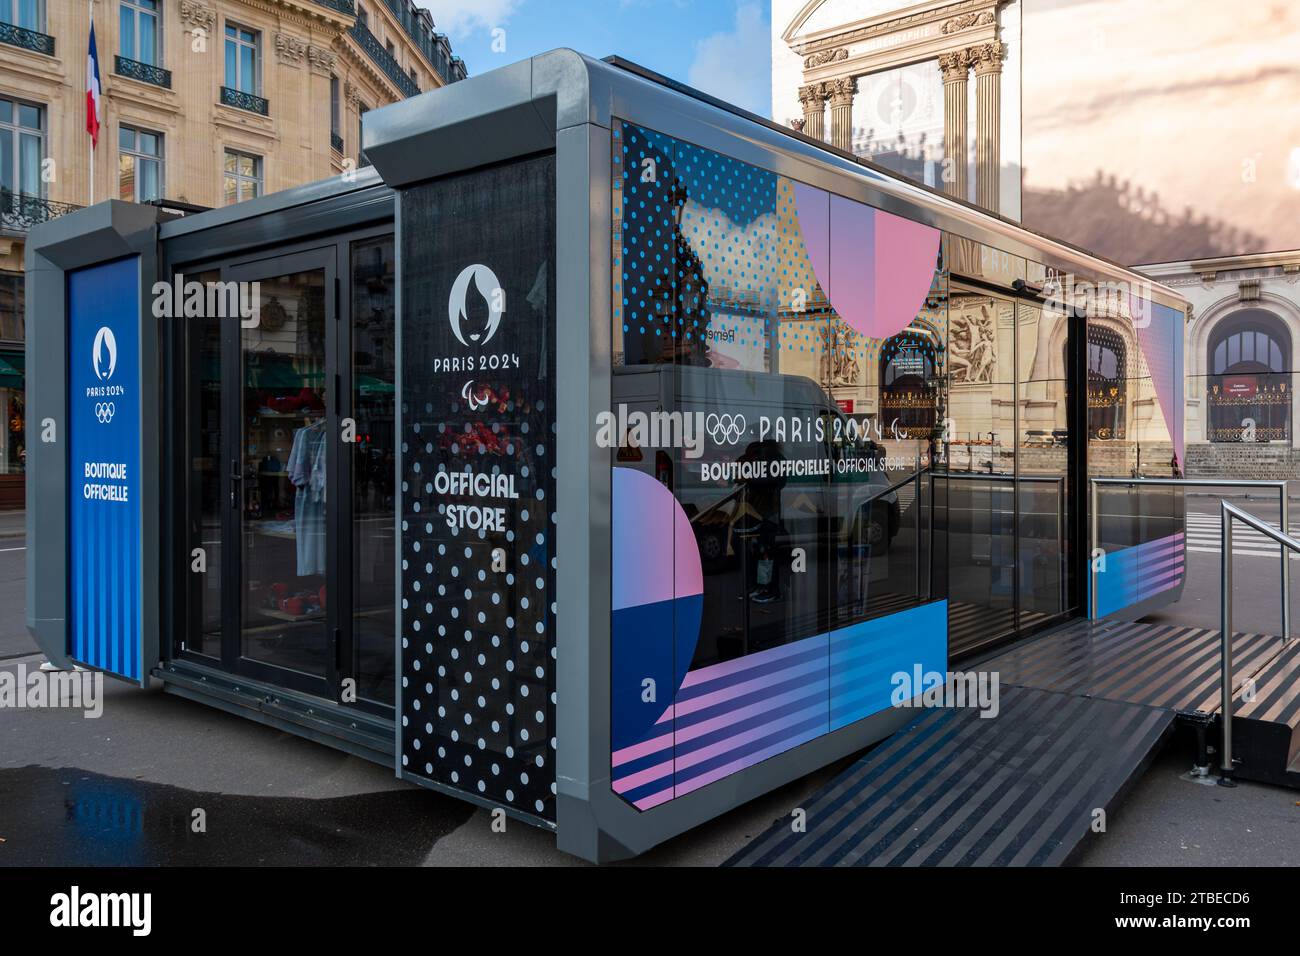 Exterior view of the official store of the Paris 2024 Summer Olympic and Paralympic Games located Place de l'Opéra in Paris, France Stock Photo